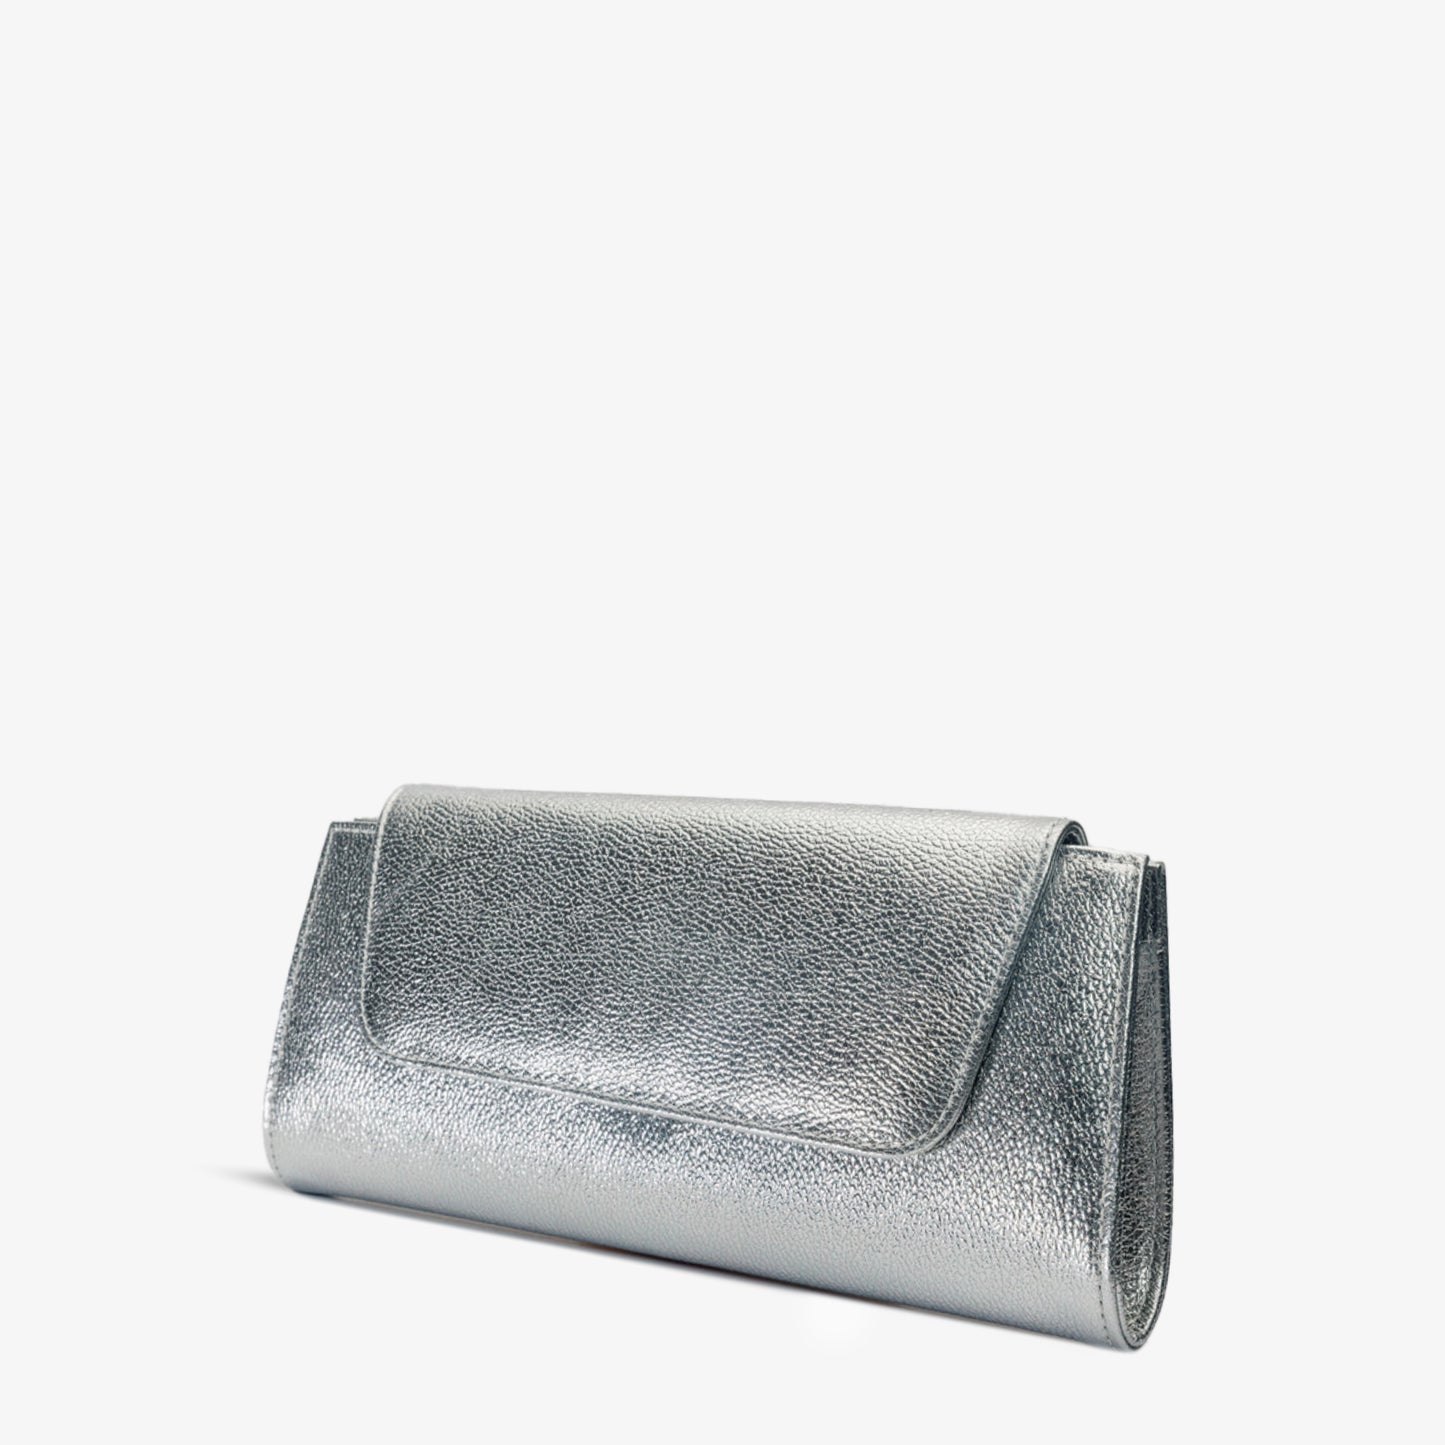 The Ege Silver Leather Clutch